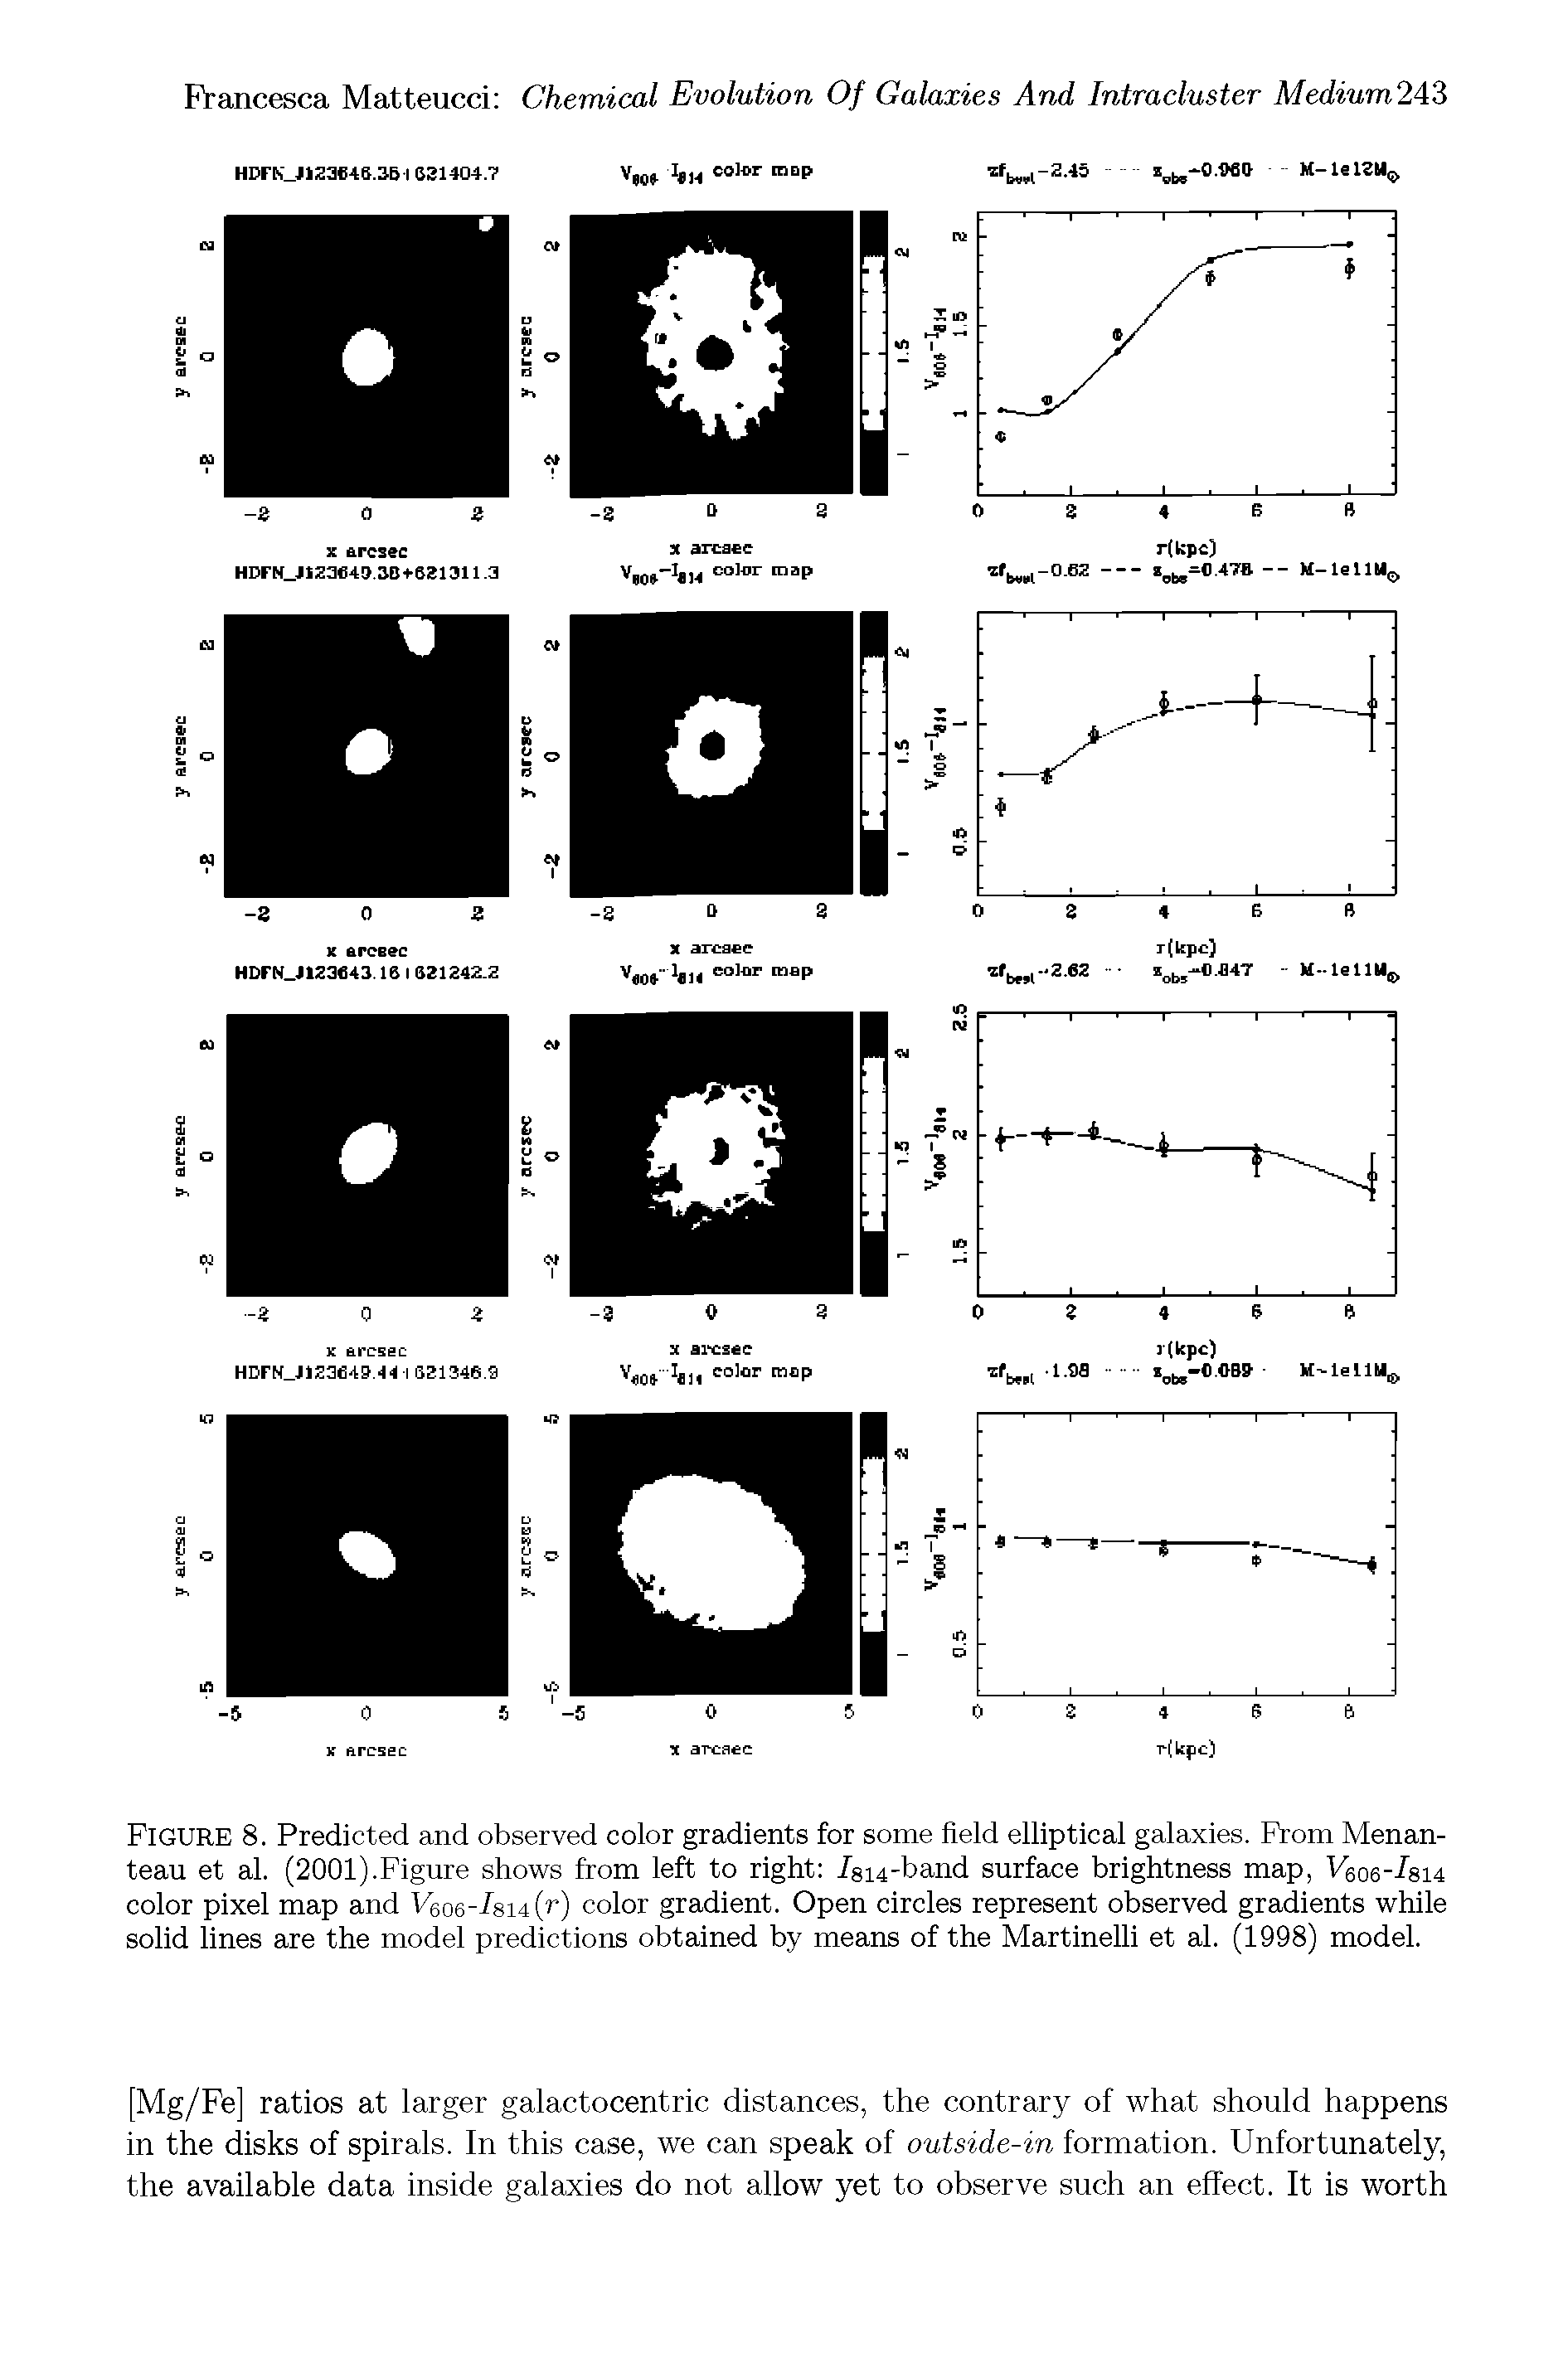 Figure 8. Predicted and observed color gradients for some field elliptical galaxies. From Menan-teau et al. (2001).Figure shows from left to right /si4-band surface brightness map, V606- 8i4 color pixel map and V606--l8i4(r) color gradient. Open circles represent observed gradients while solid lines are the model predictions obtained by means of the Martinelli et al. (1998) model.